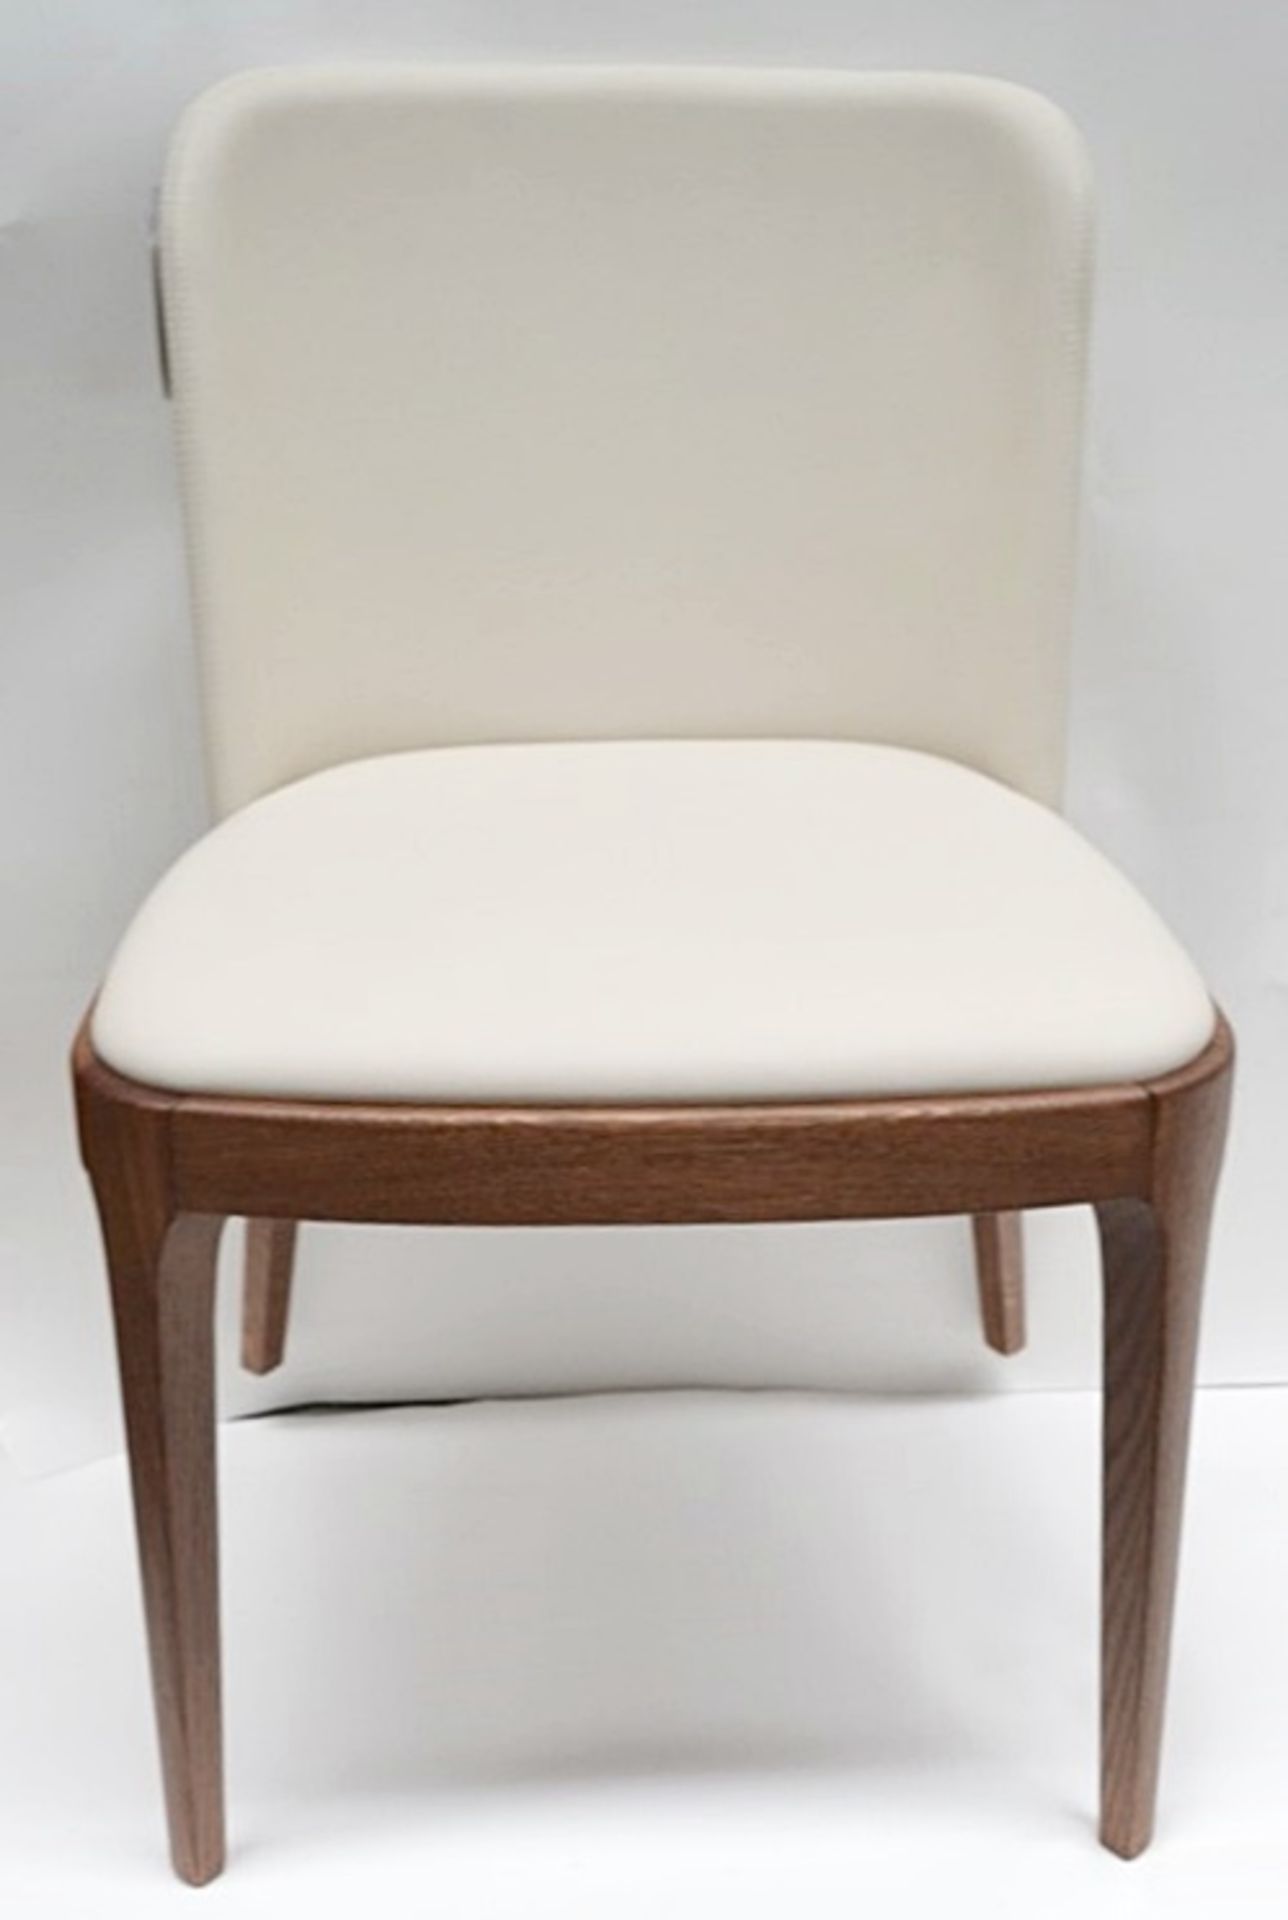 4 x Matching CATTELAN "Magda" Leather & Oak Chairs - Dimensions: w:53 d:55 h:81cm (seat height 48cm) - Image 4 of 7